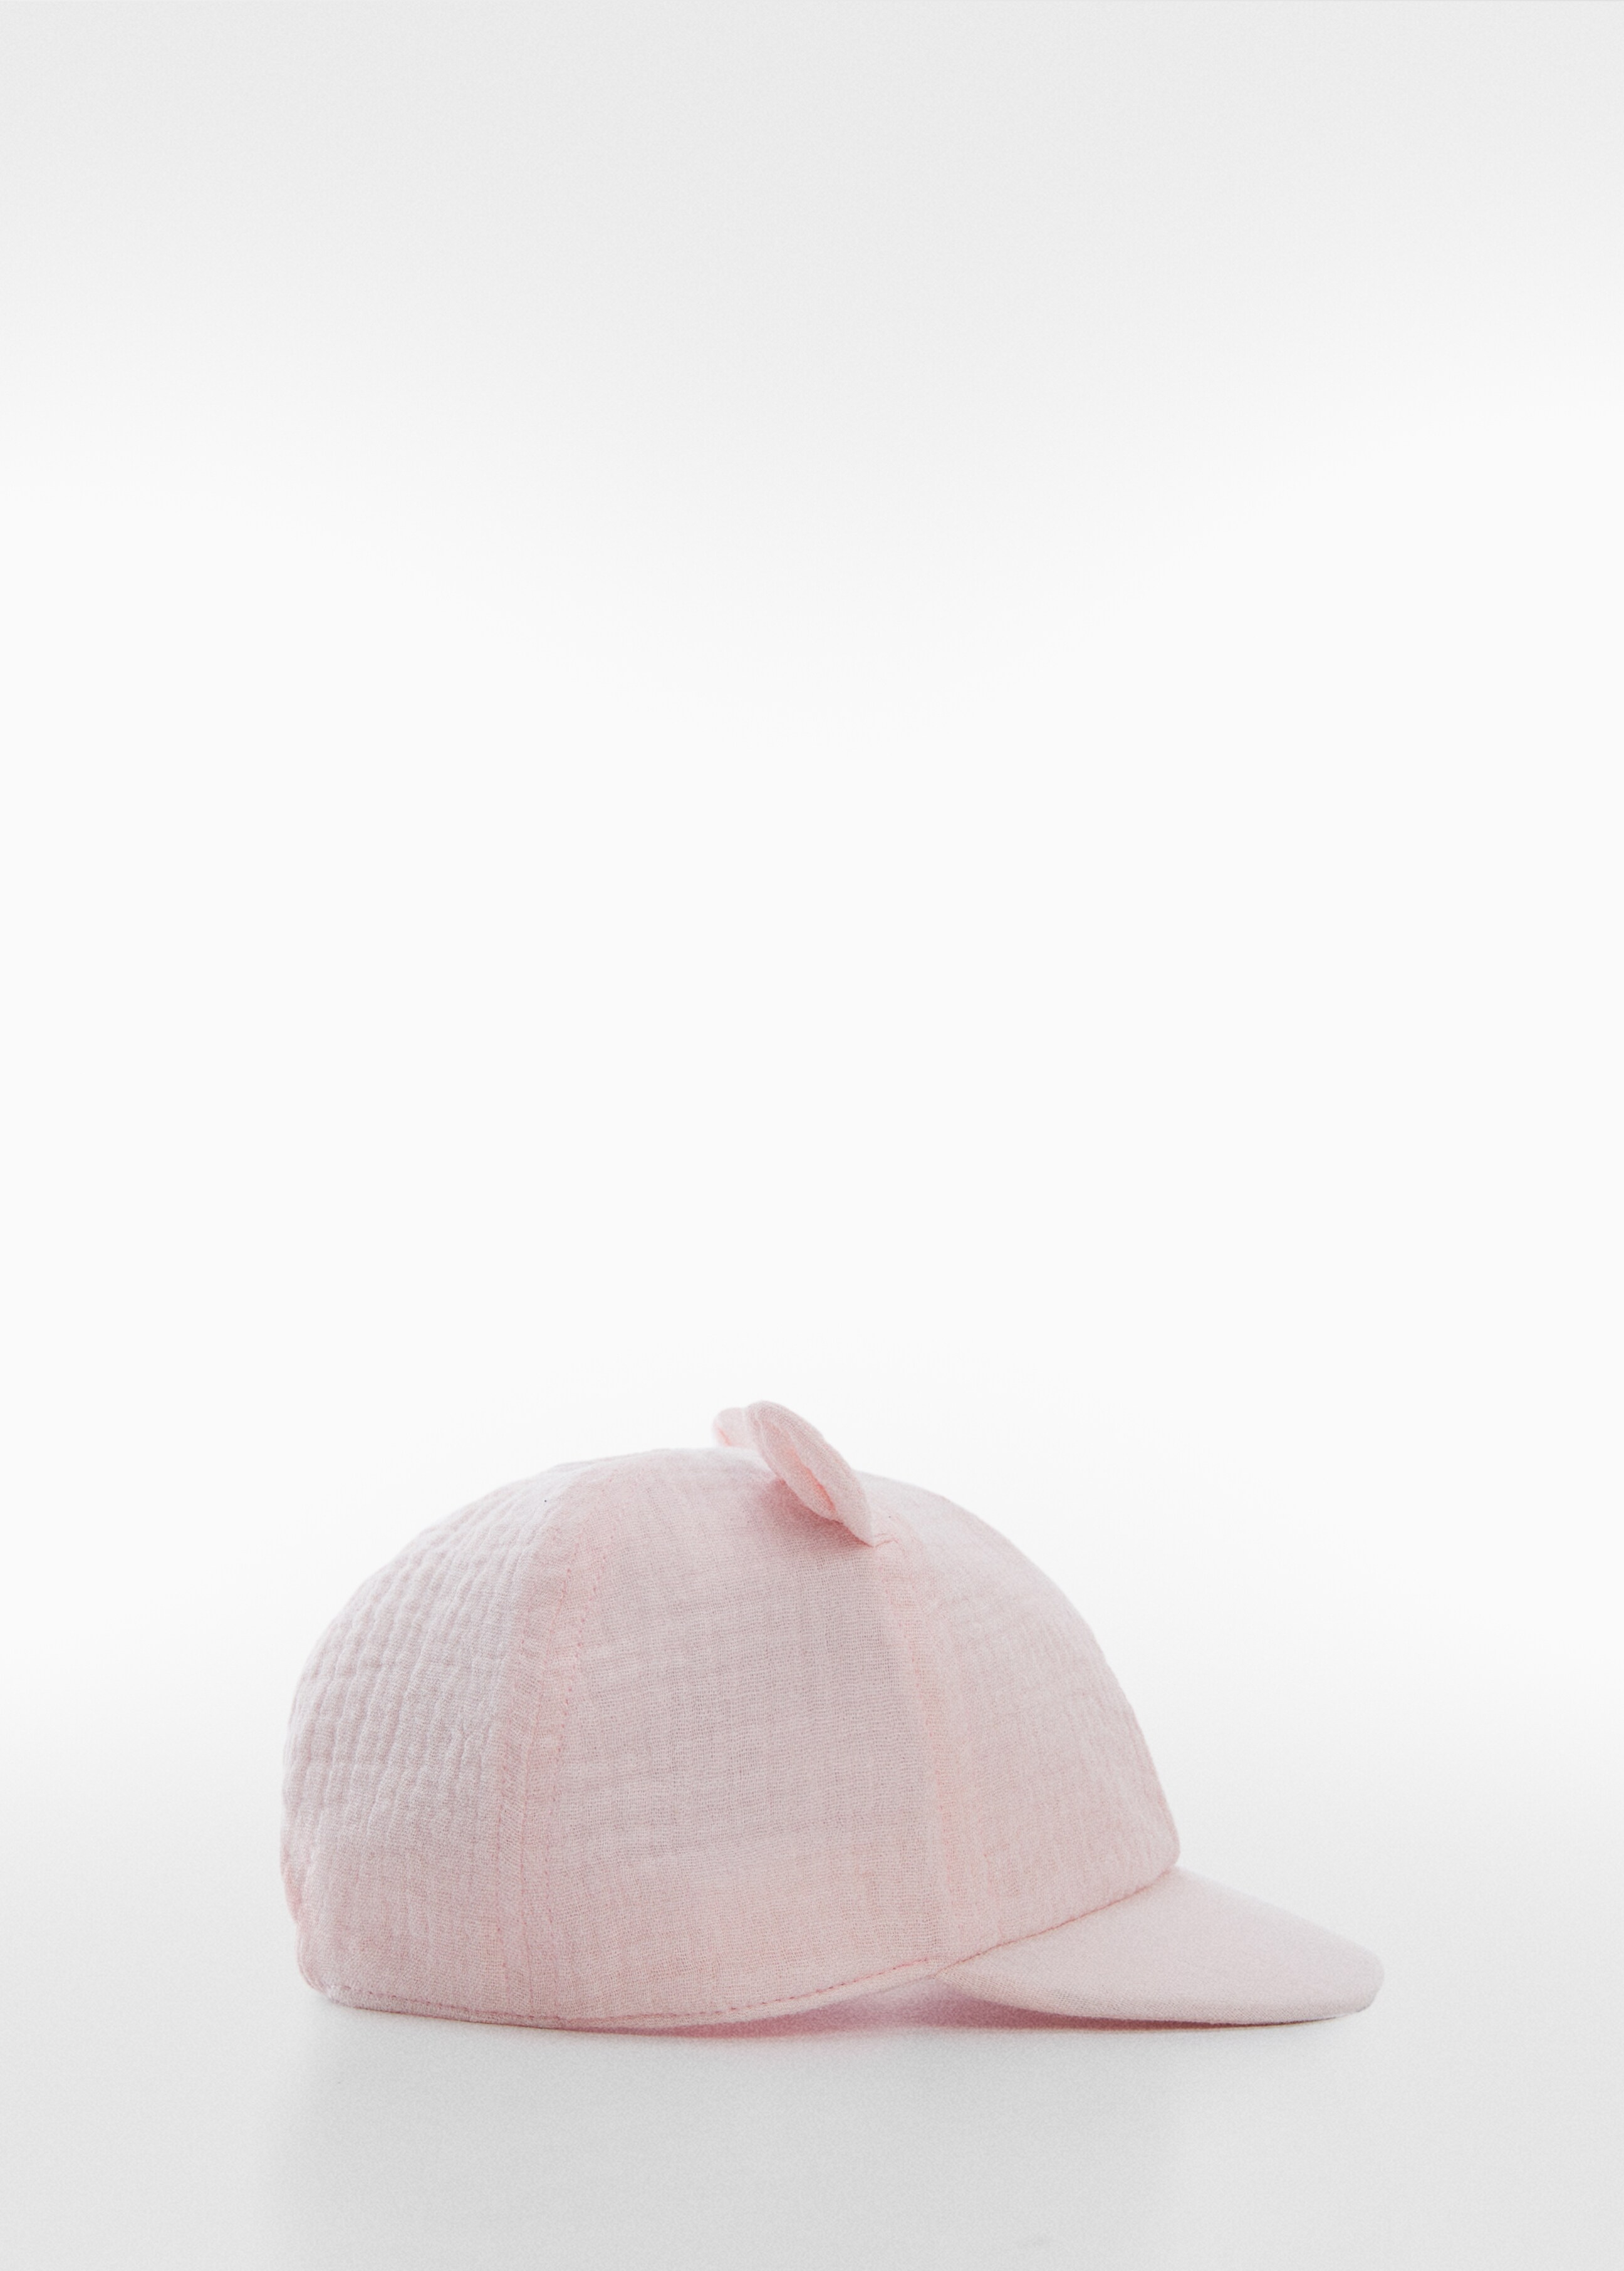 Ears cap - Article without model